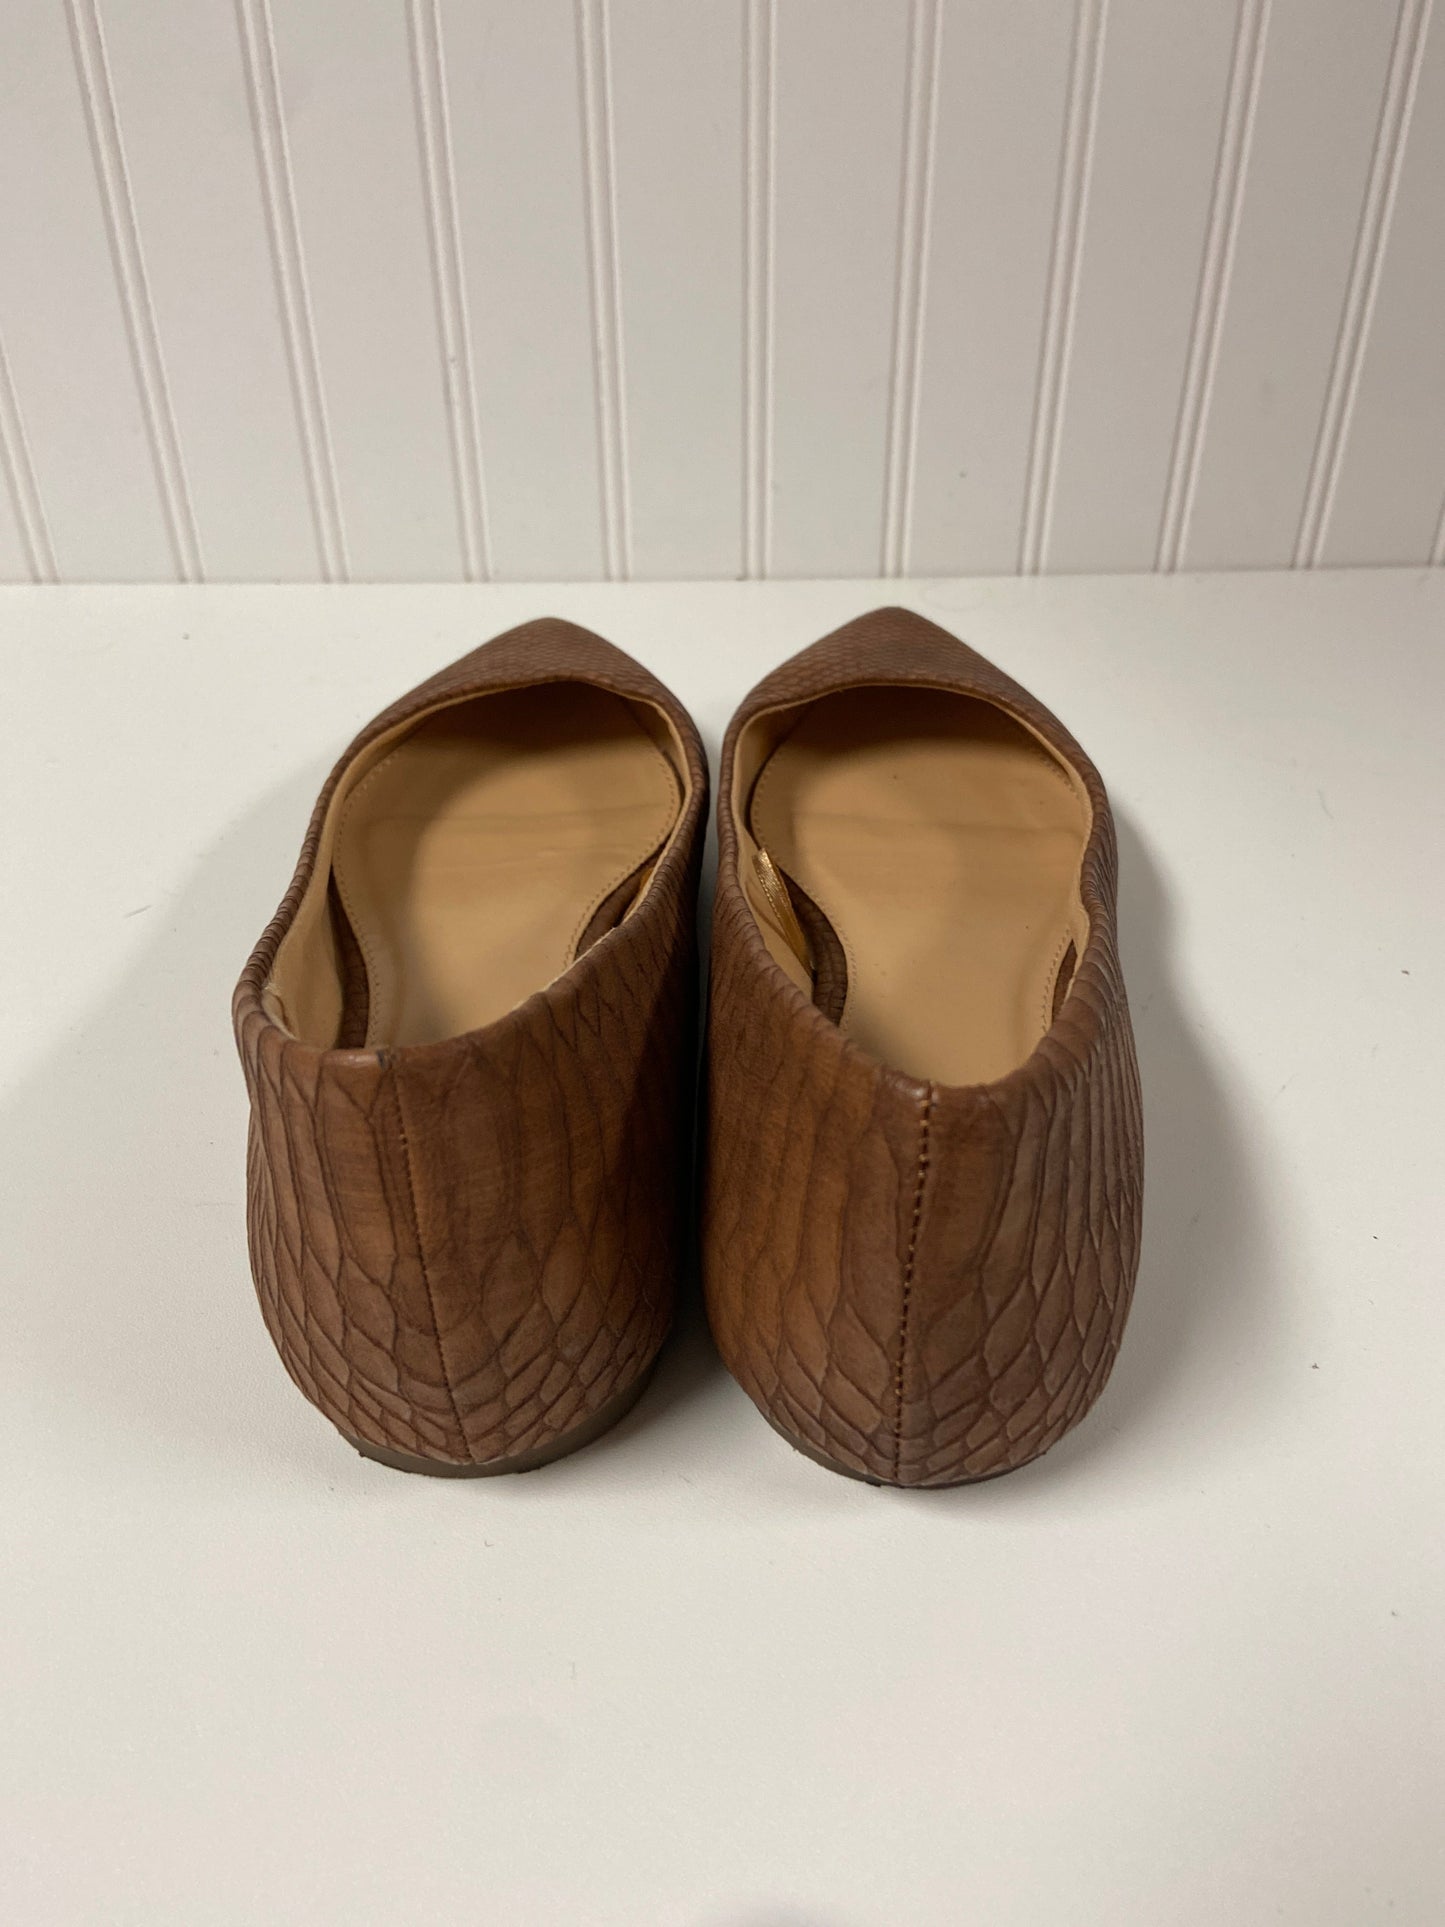 Brown Shoes Flats Express, Size 9